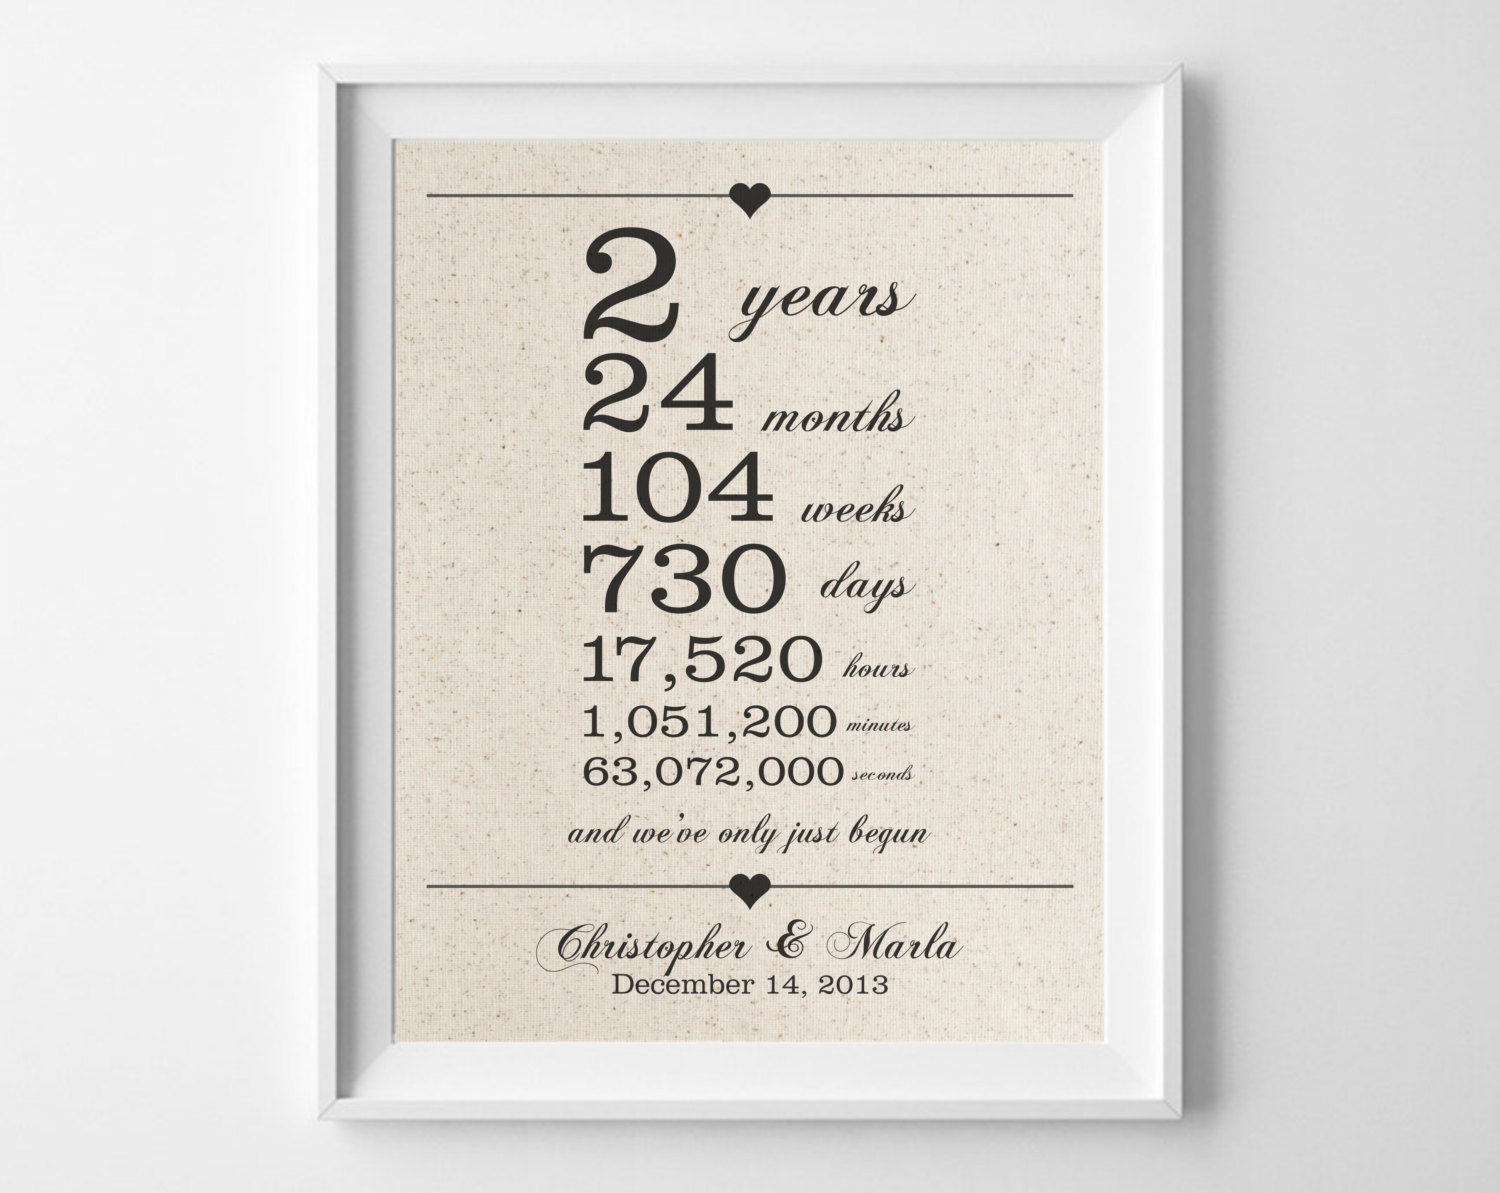 2Nd Year Anniversary Gift Ideas For Husband
 2 years to her Cotton Anniversary Print 2nd Anniversary